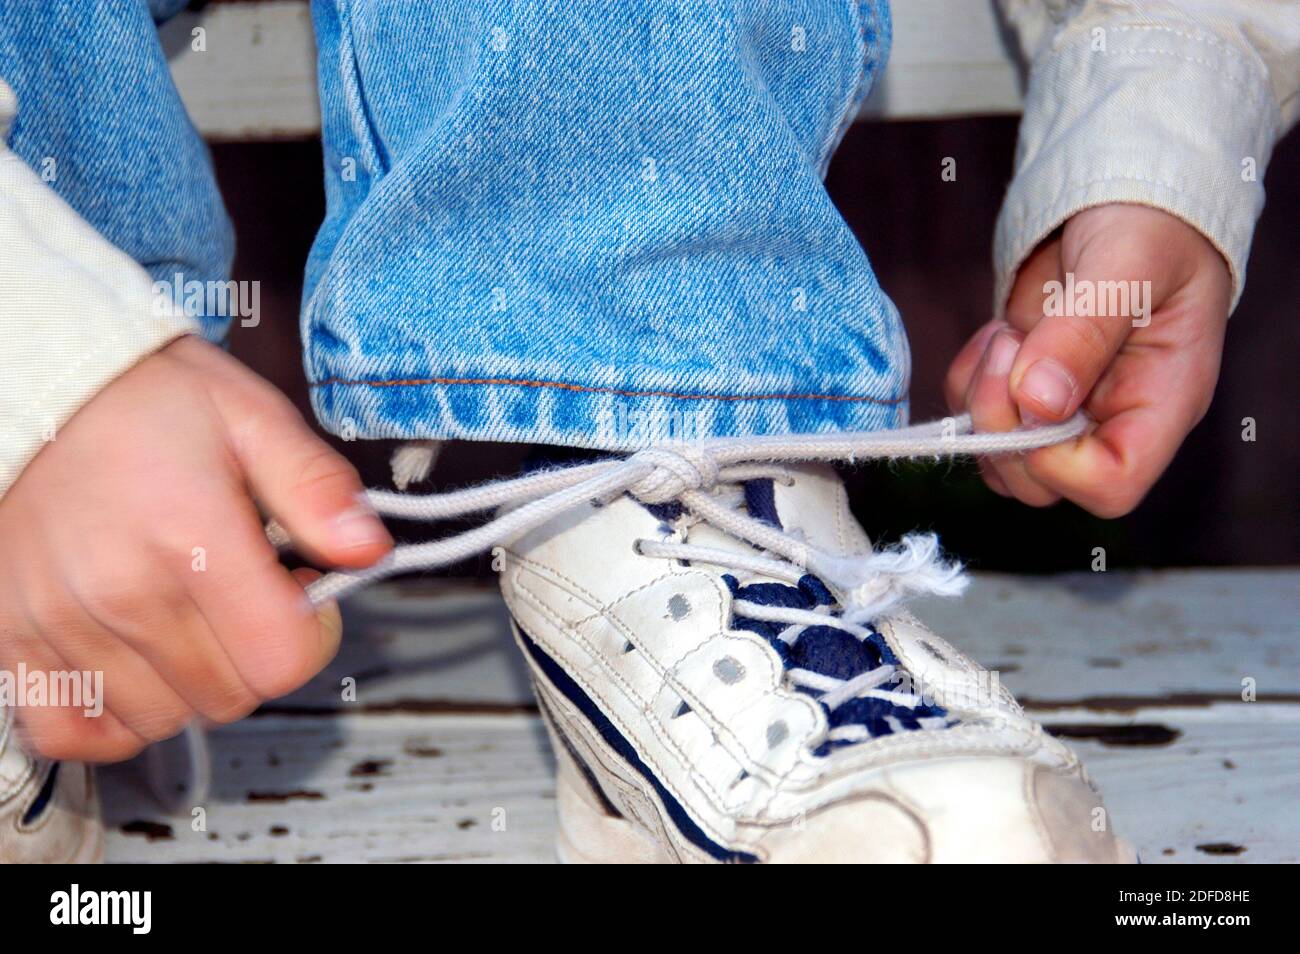 Four year old boy learning to tie shoe laces Stock Photo